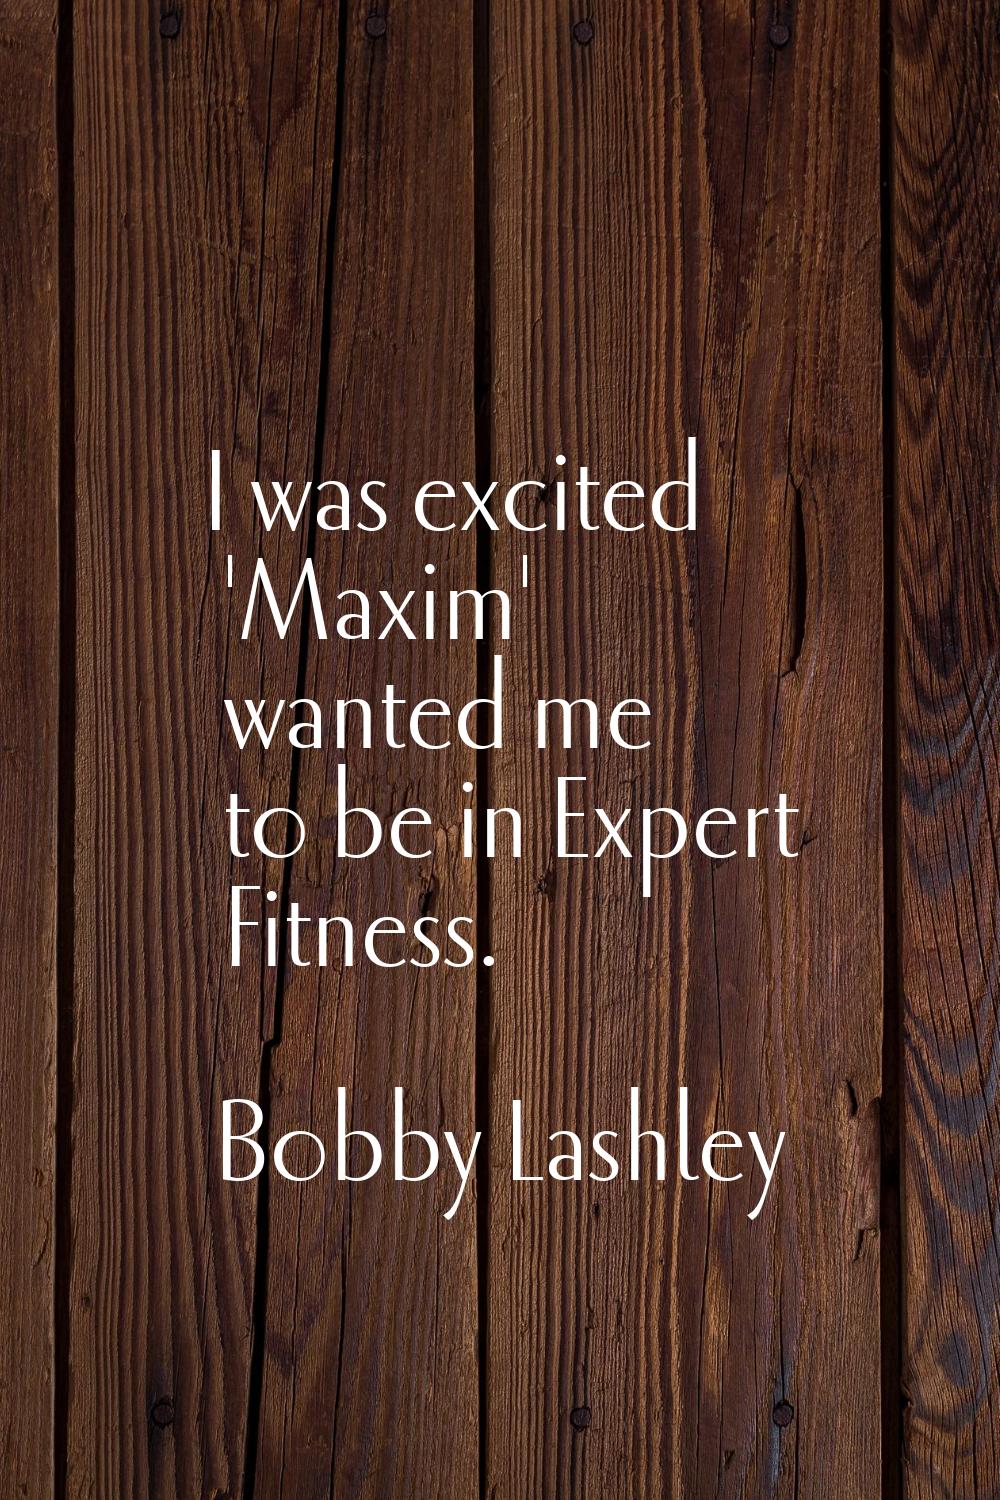 I was excited 'Maxim' wanted me to be in Expert Fitness.